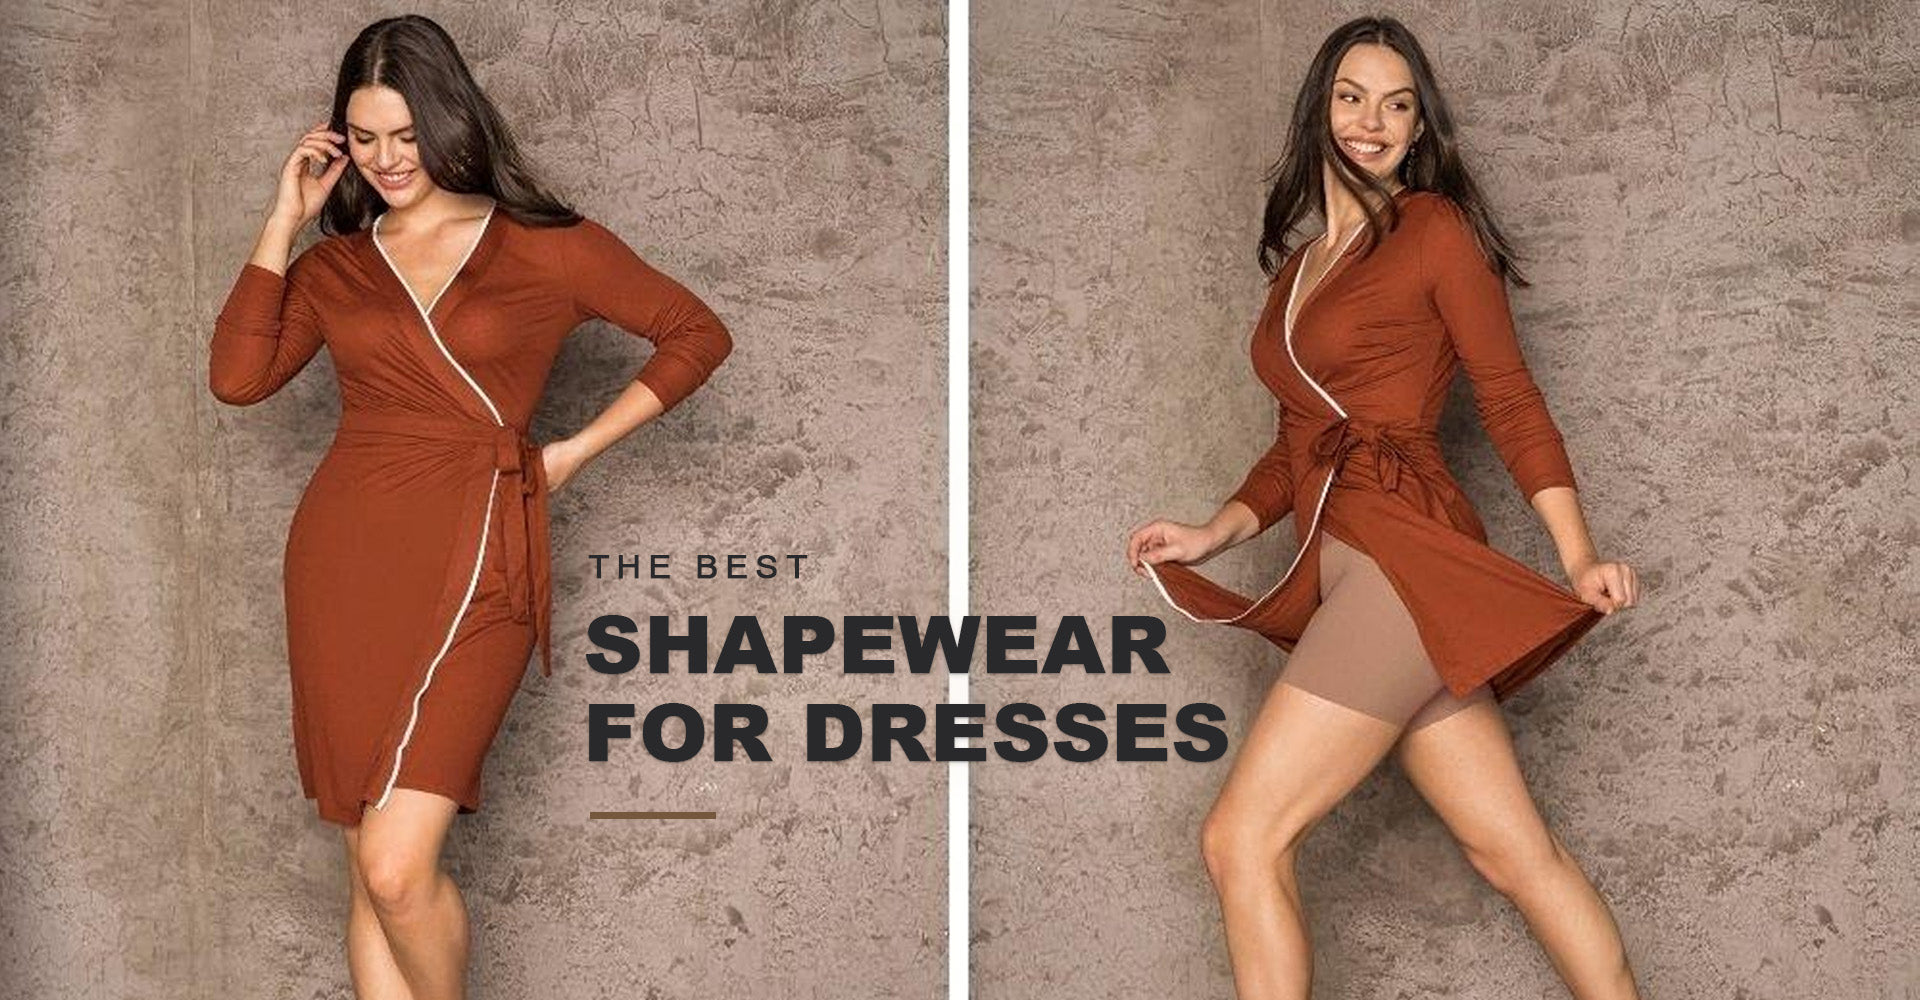 The best Shapewear for dresses